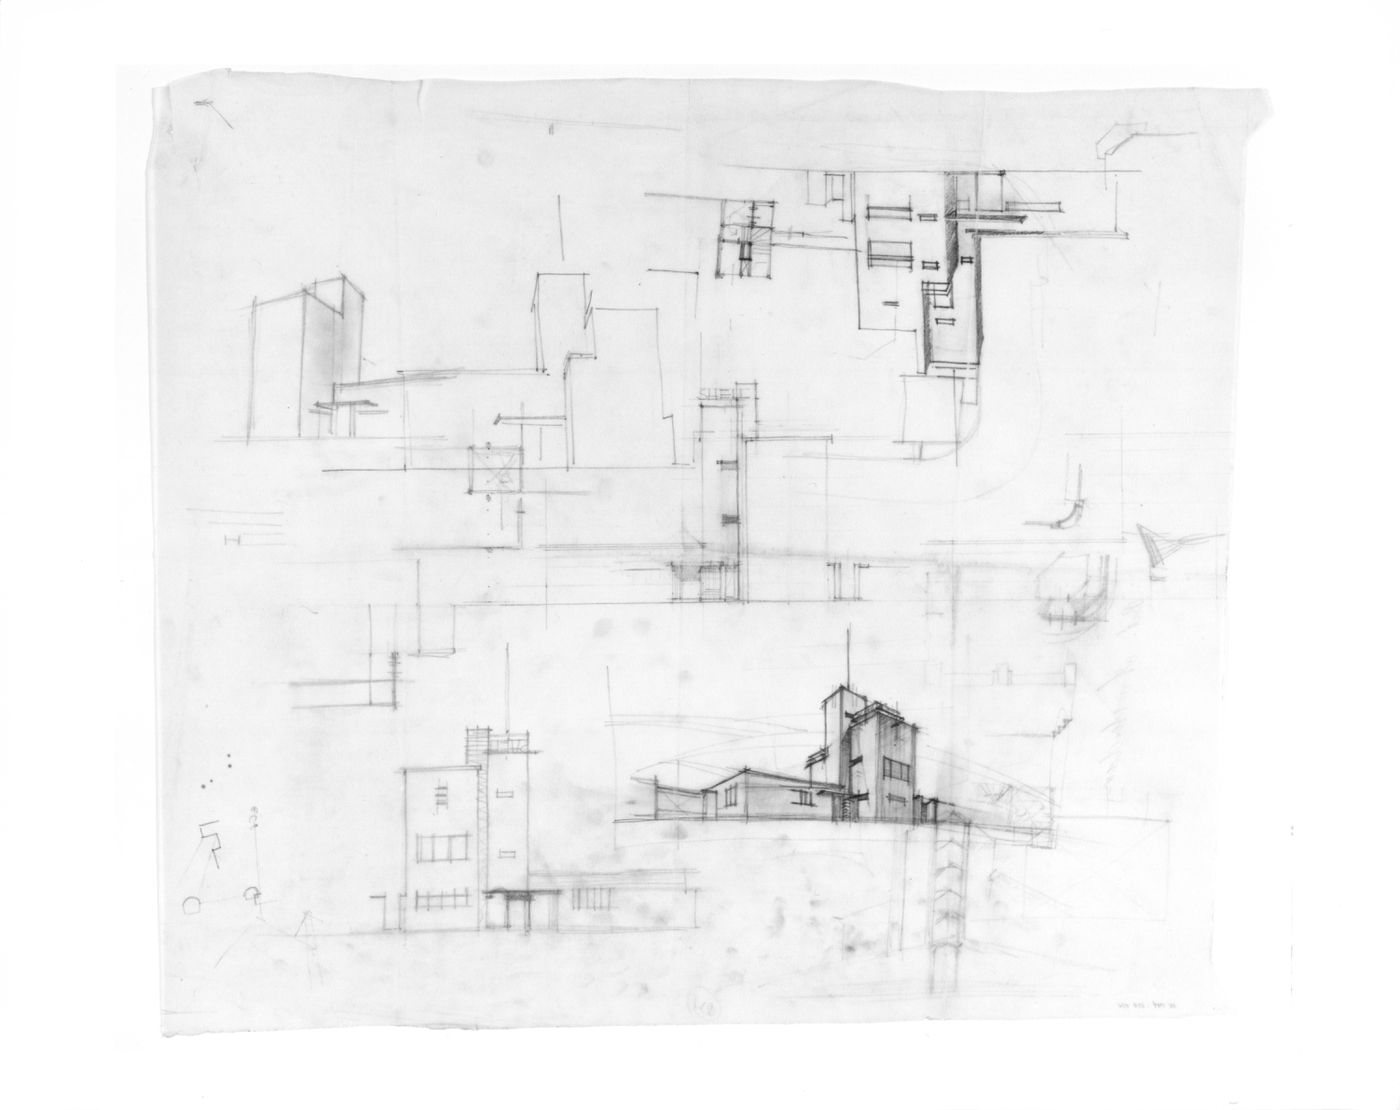 Sketch perspectives, sketch elevation, and sketch plan for an administration building for the Shell Company, Amsterdam, Netherlands